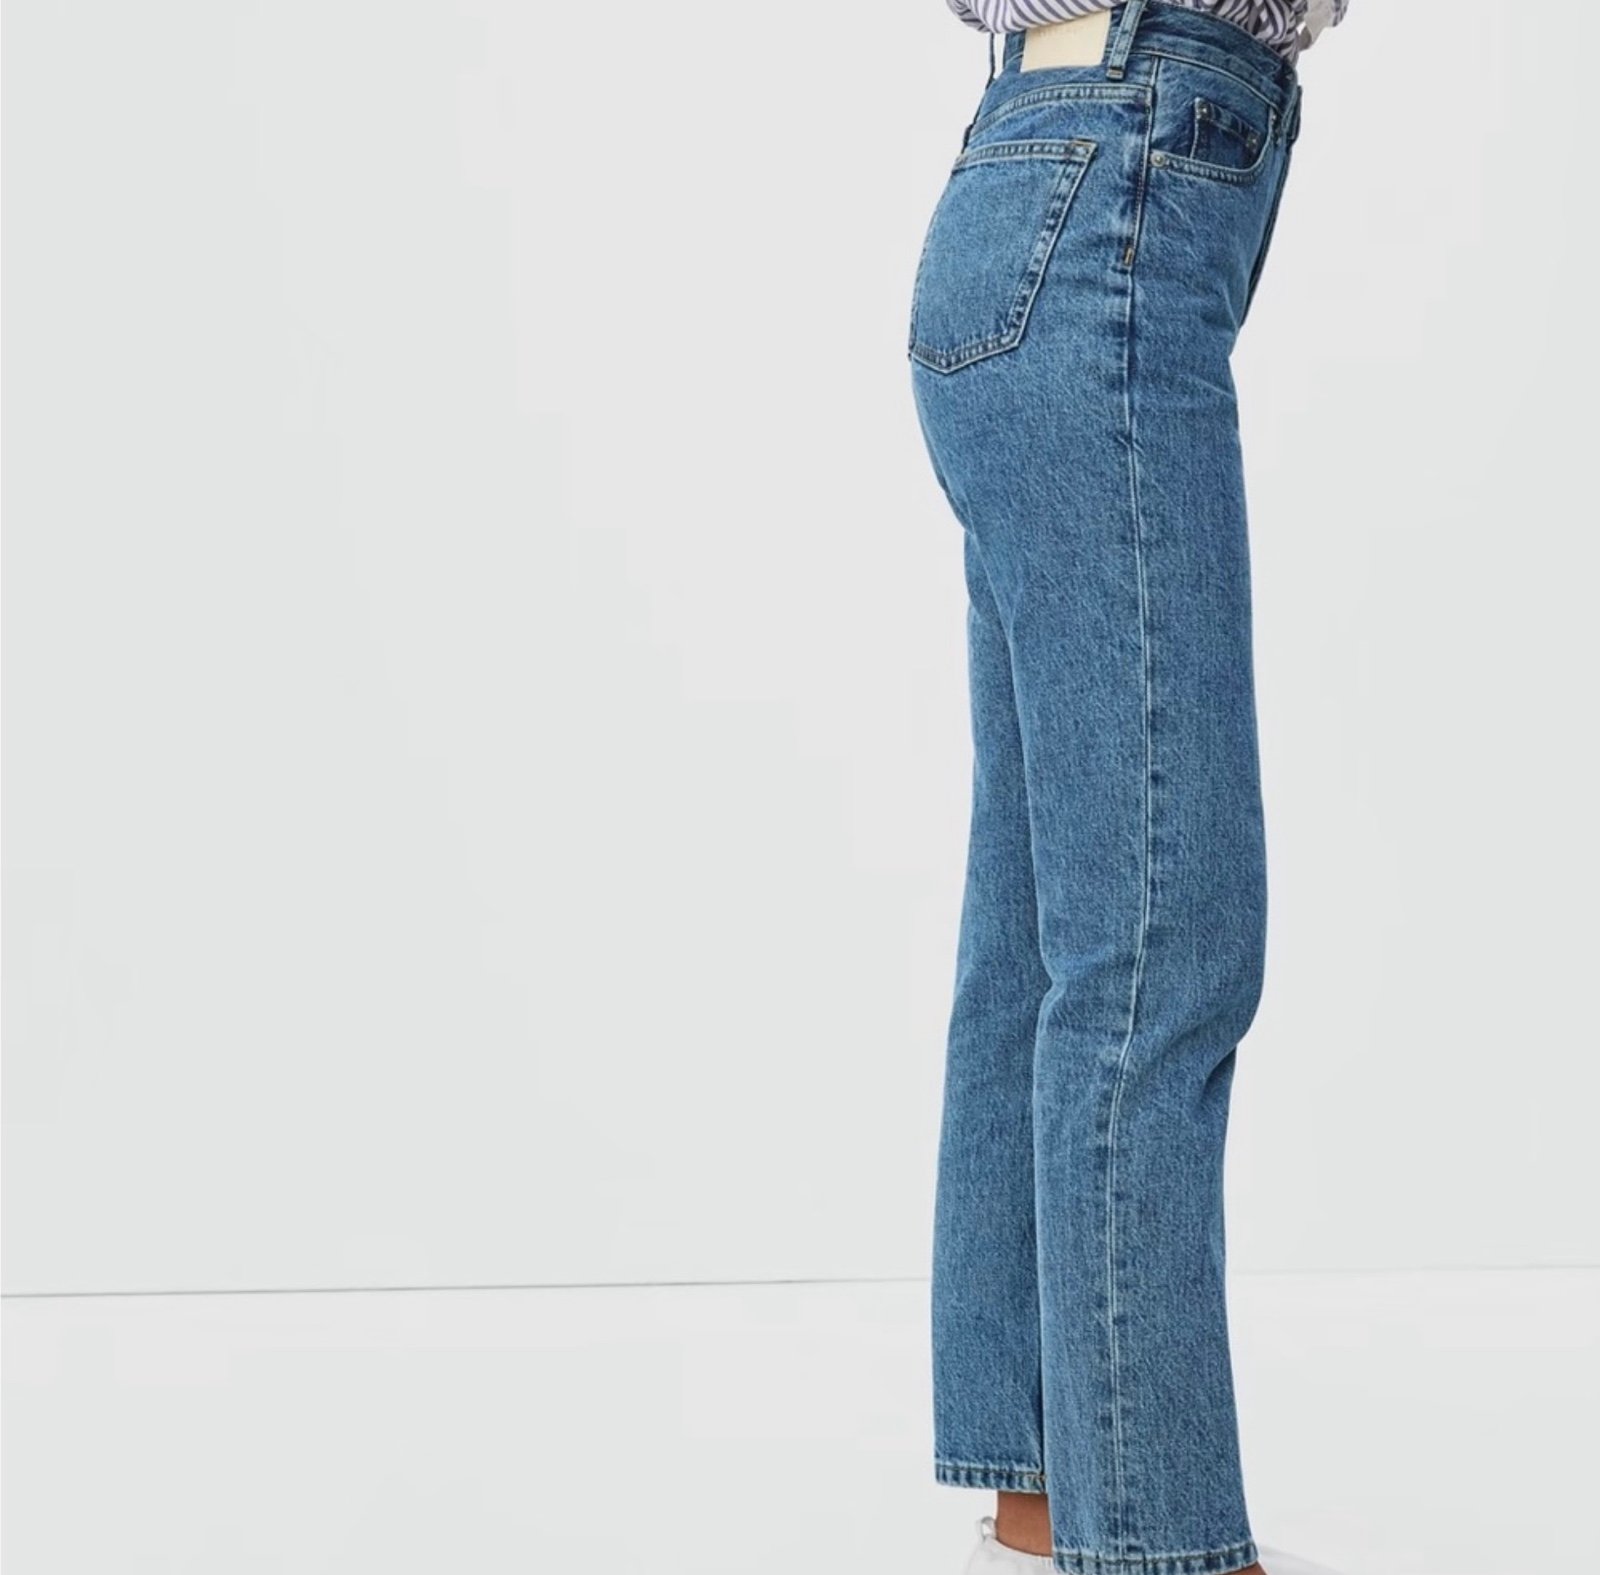 large discount everlane jeans hsF9Mf7ok Outlet Store